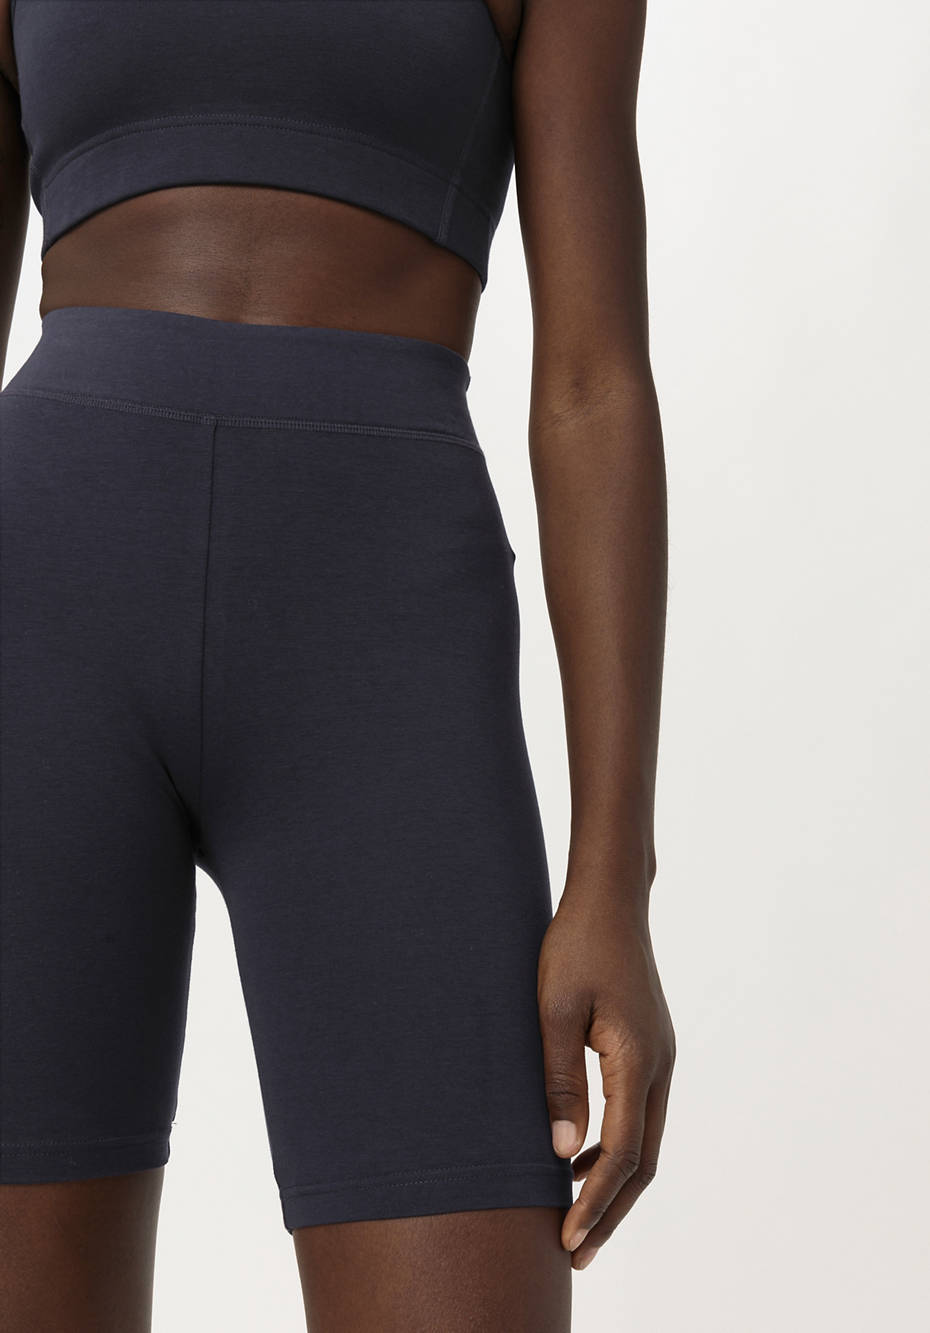 Short sports leggings made from organic cotton